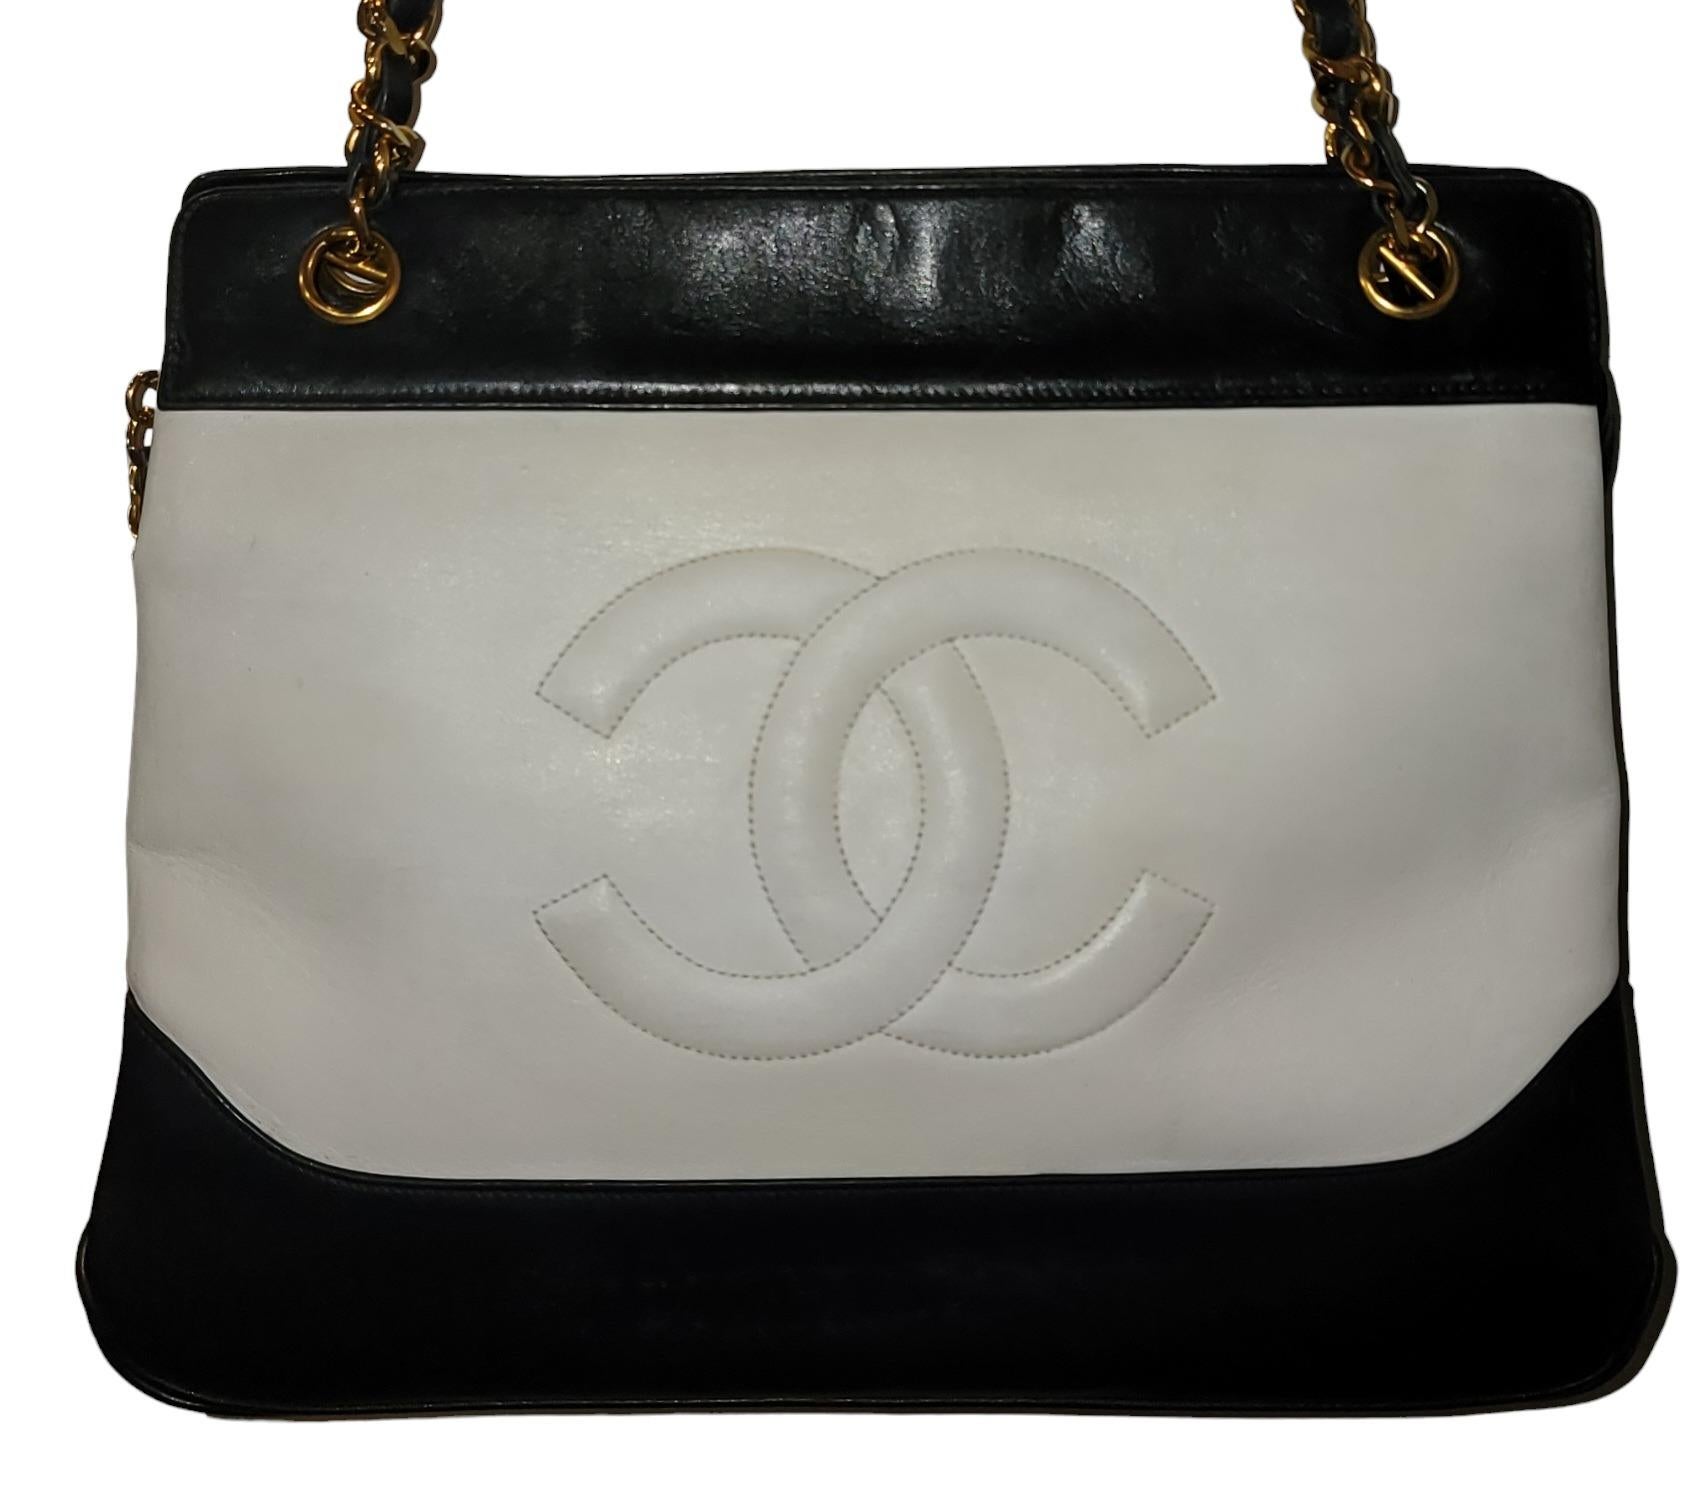 Auth Vintge chanel Rare Shoulder Bag w/Gold Accents In Good Condition For Sale In Pasadena, CA